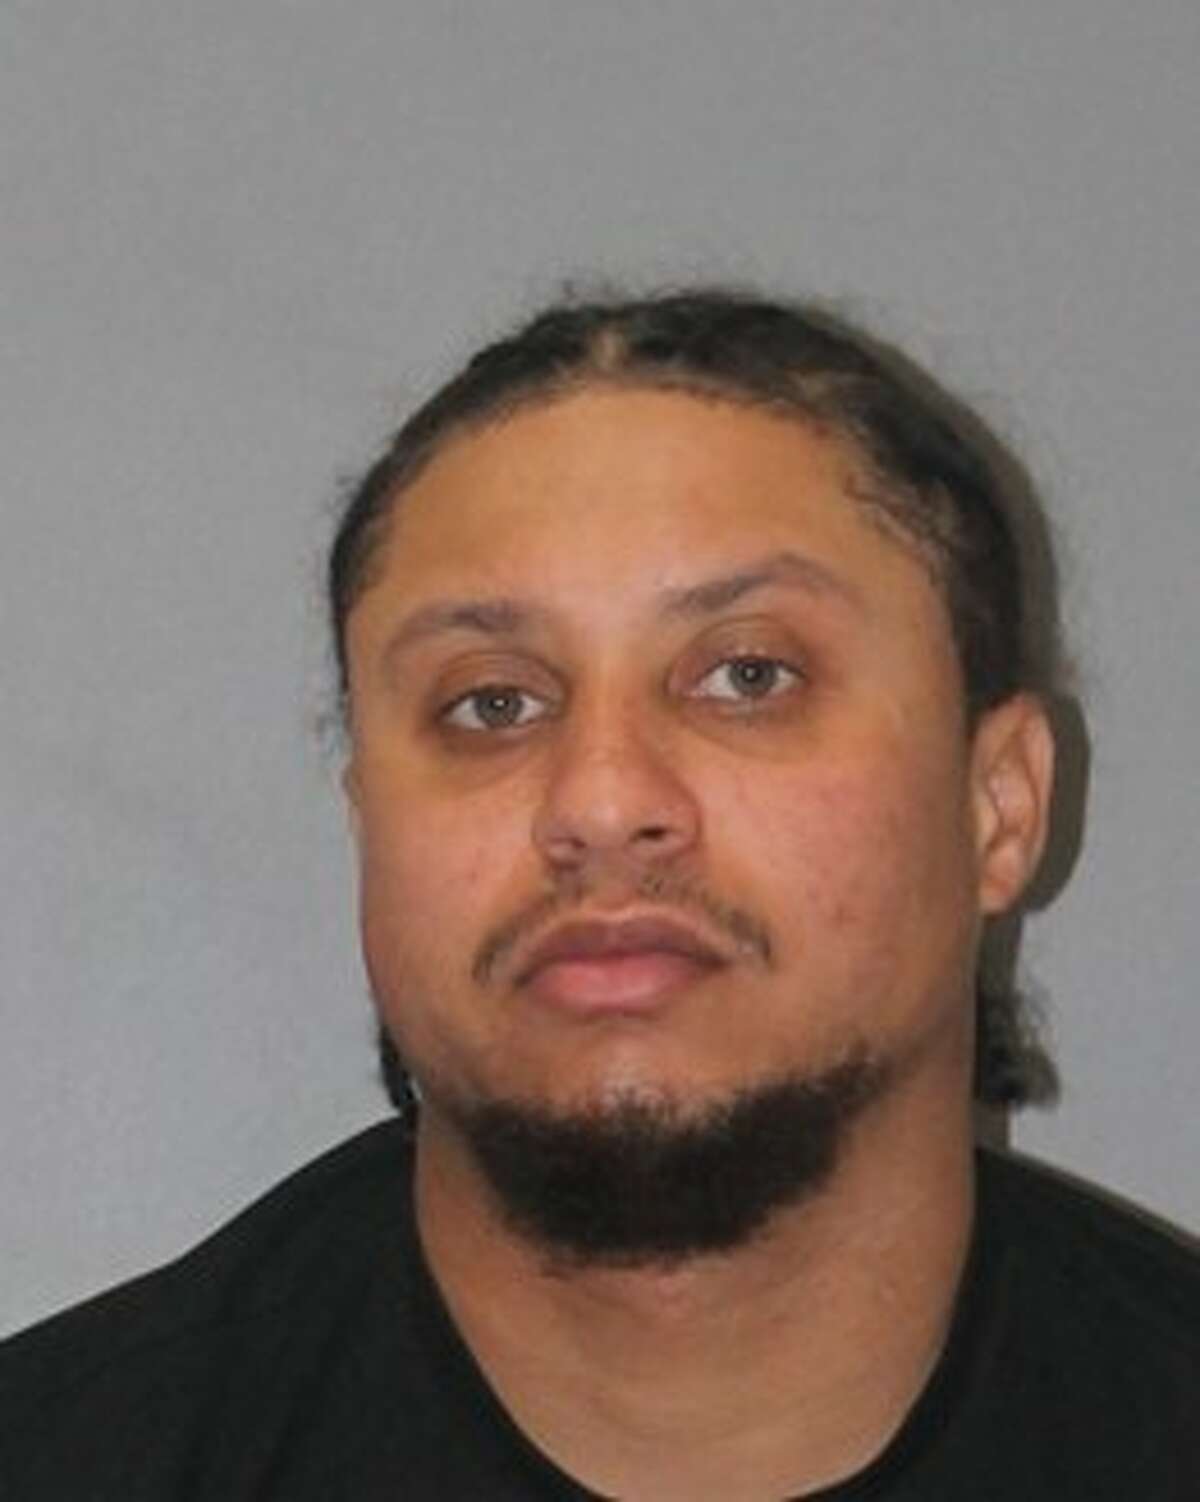 Sergio Cruz, 31, of Bridgeport, was arrested Friday after patrol officers discovered a loaded handgun stored under the driver's seat of his car during a traffic stop, according to West Hartford police. Investigators also recovered marijuana and materials used to package and sell drugs from the car, police said.